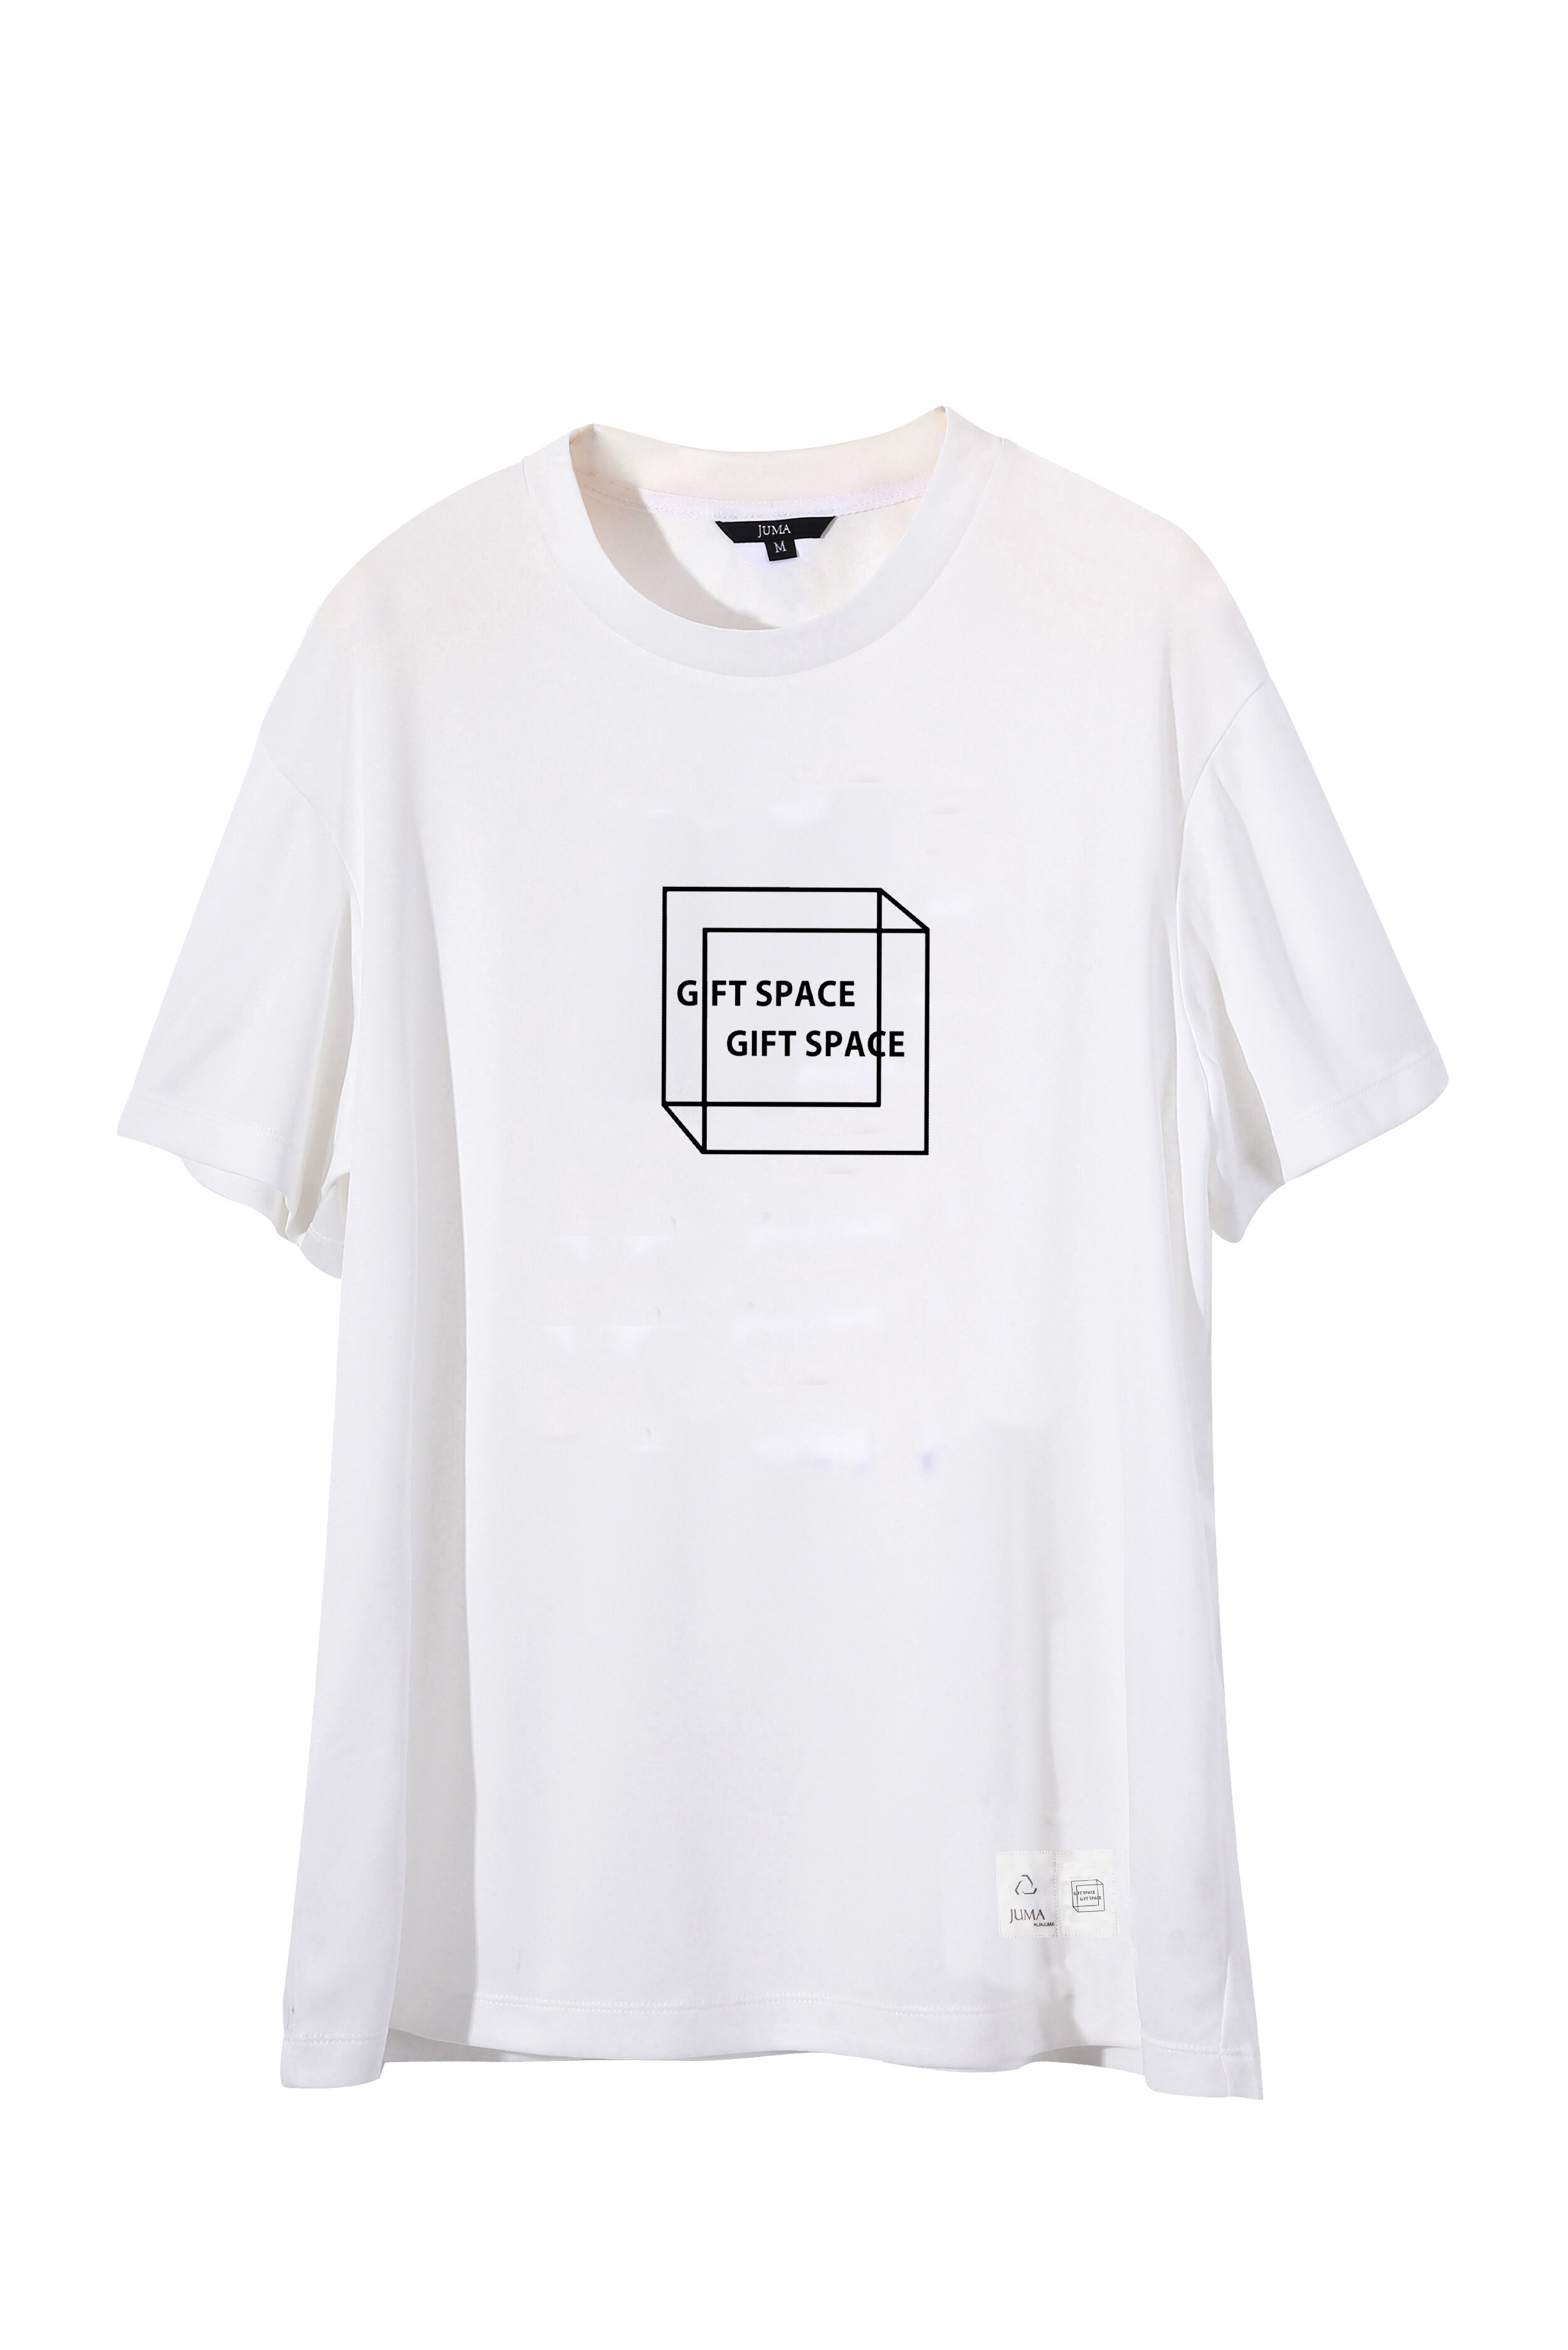 Gift Space T恤-4个回收水瓶-白色｜Gift Space Printed T-Shirt - 4 Recycled Water Bottles -White